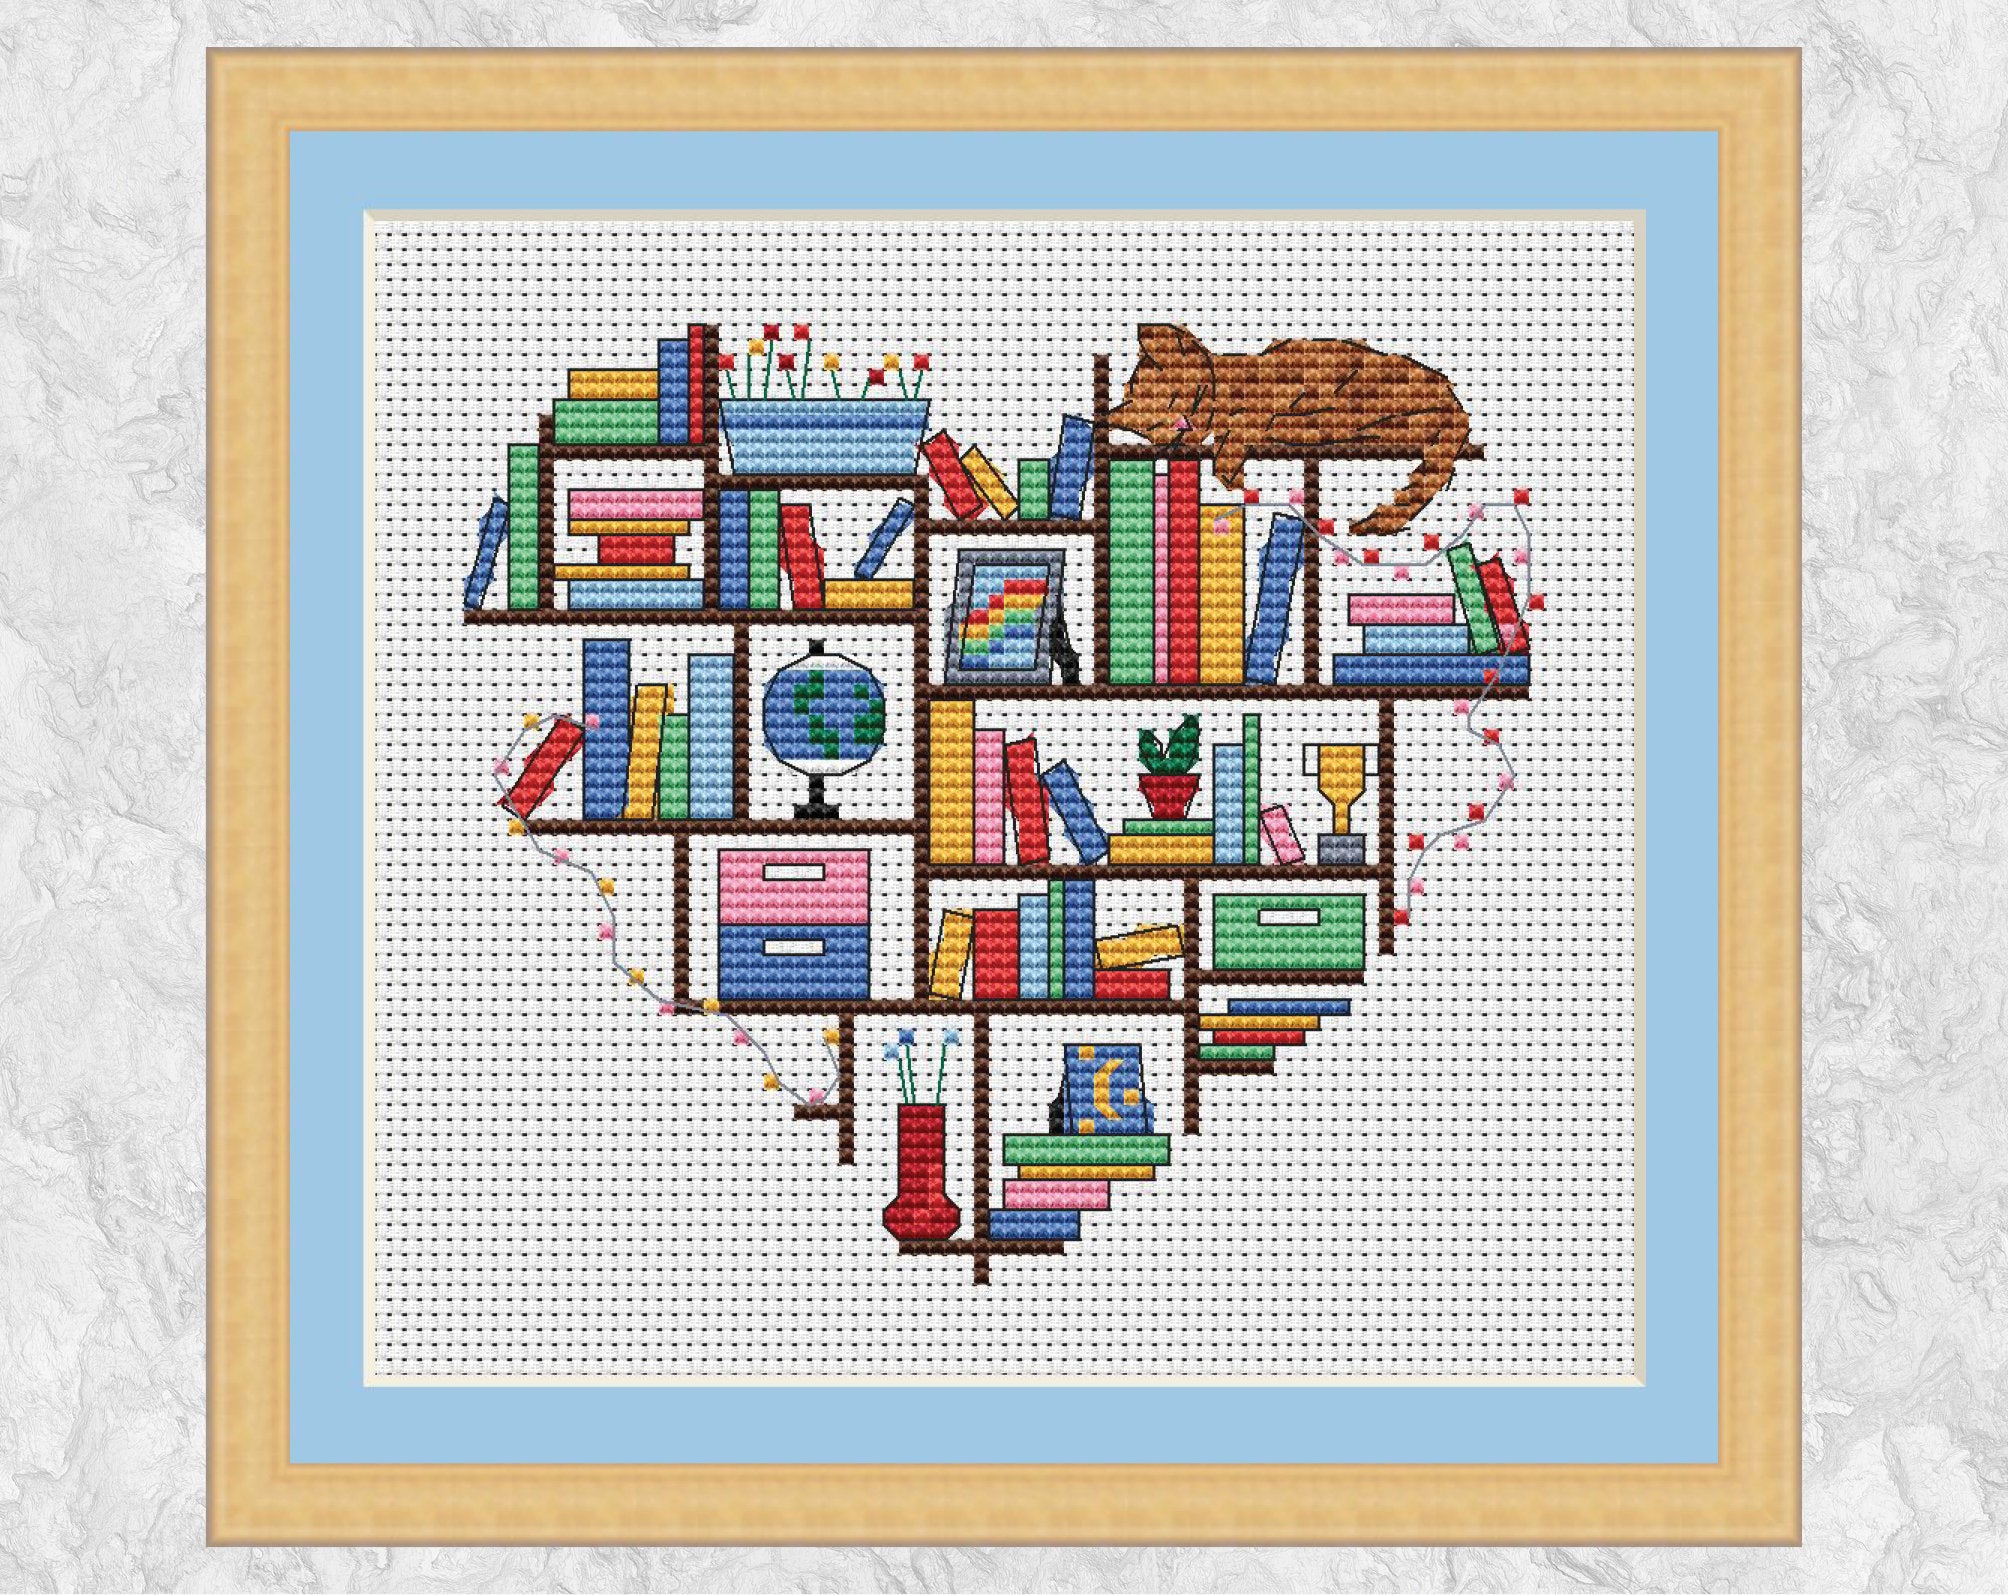 Book Heart cross stitch pattern. With frame.